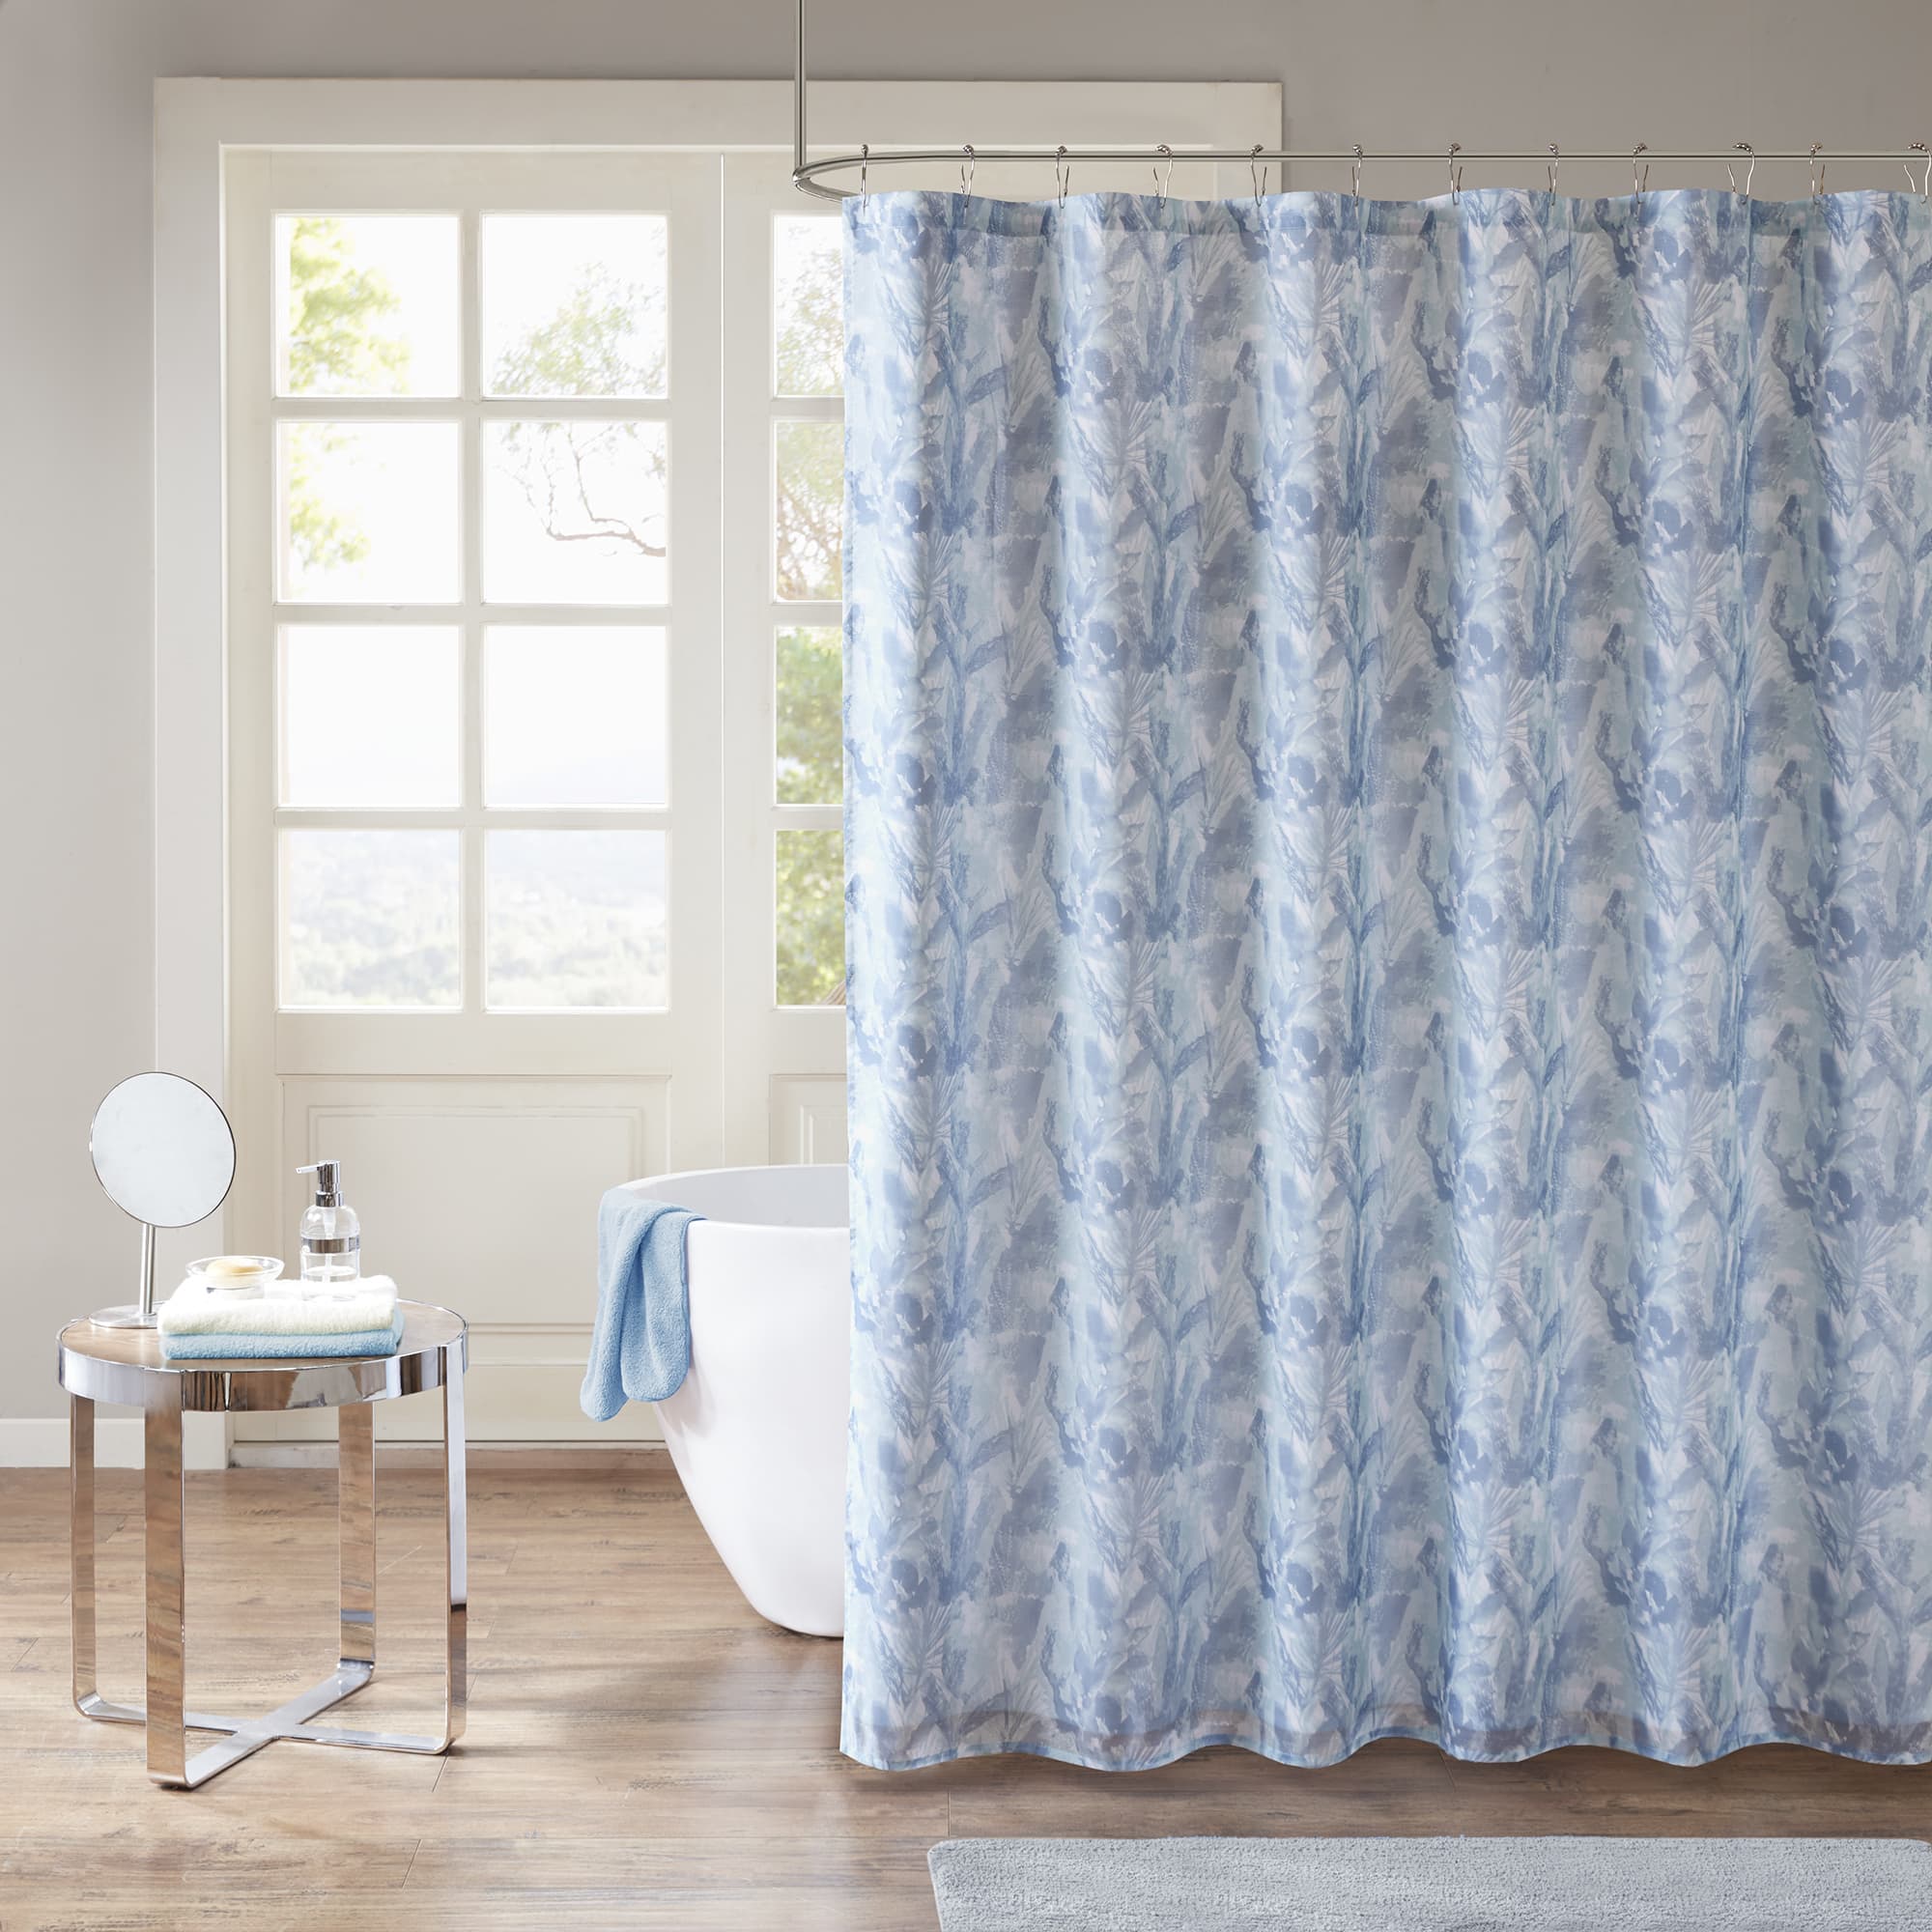 Buy Shower Curtains Online at Overstock.com | Our Best Shower ...